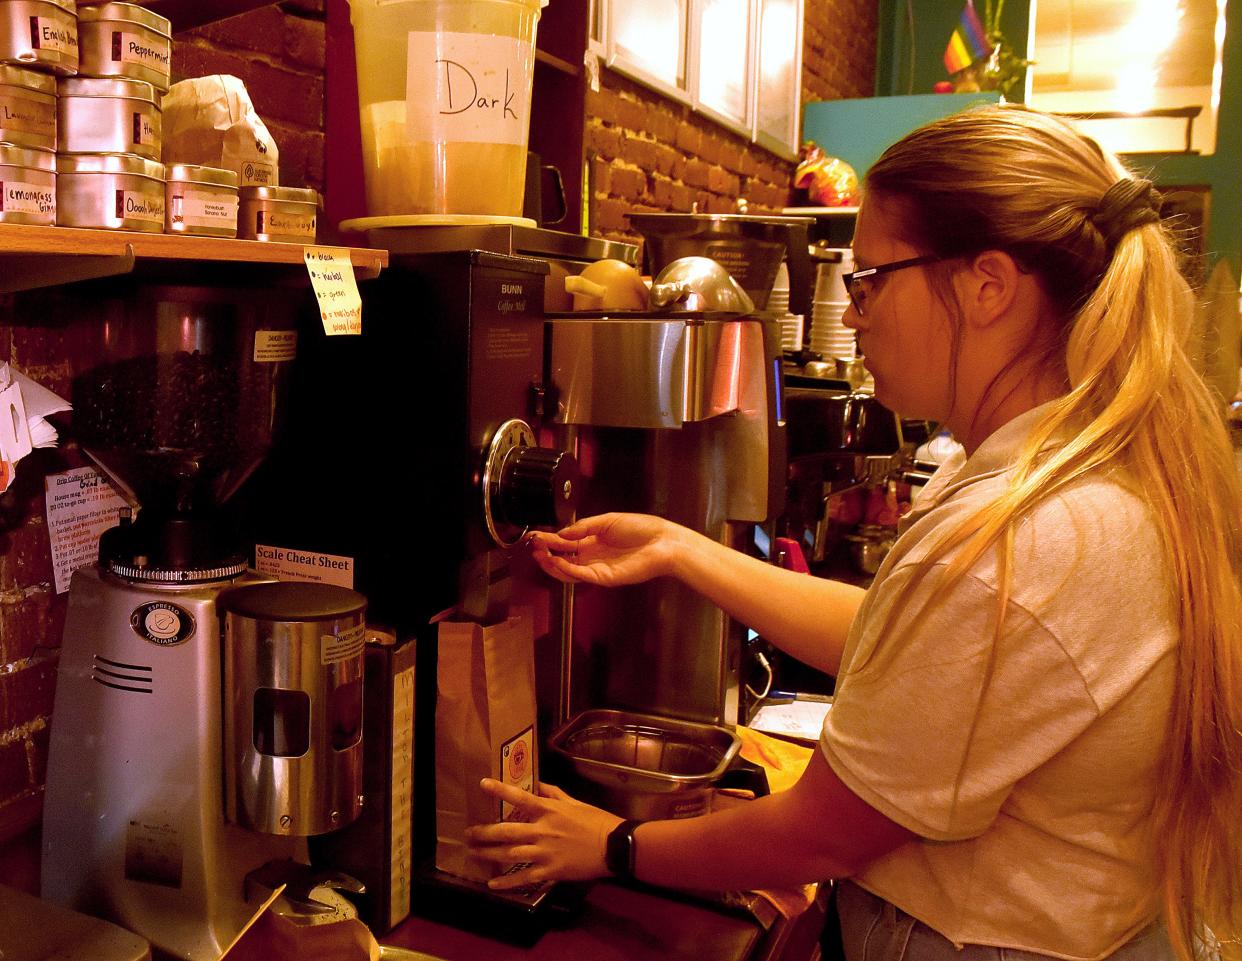 Katelyn Meyerpeter, a barista supervisor at Lakota Coffee Company at 24 S. Ninth St., grinds some hazelnut coffee beans for a customer in this 2021 photo.